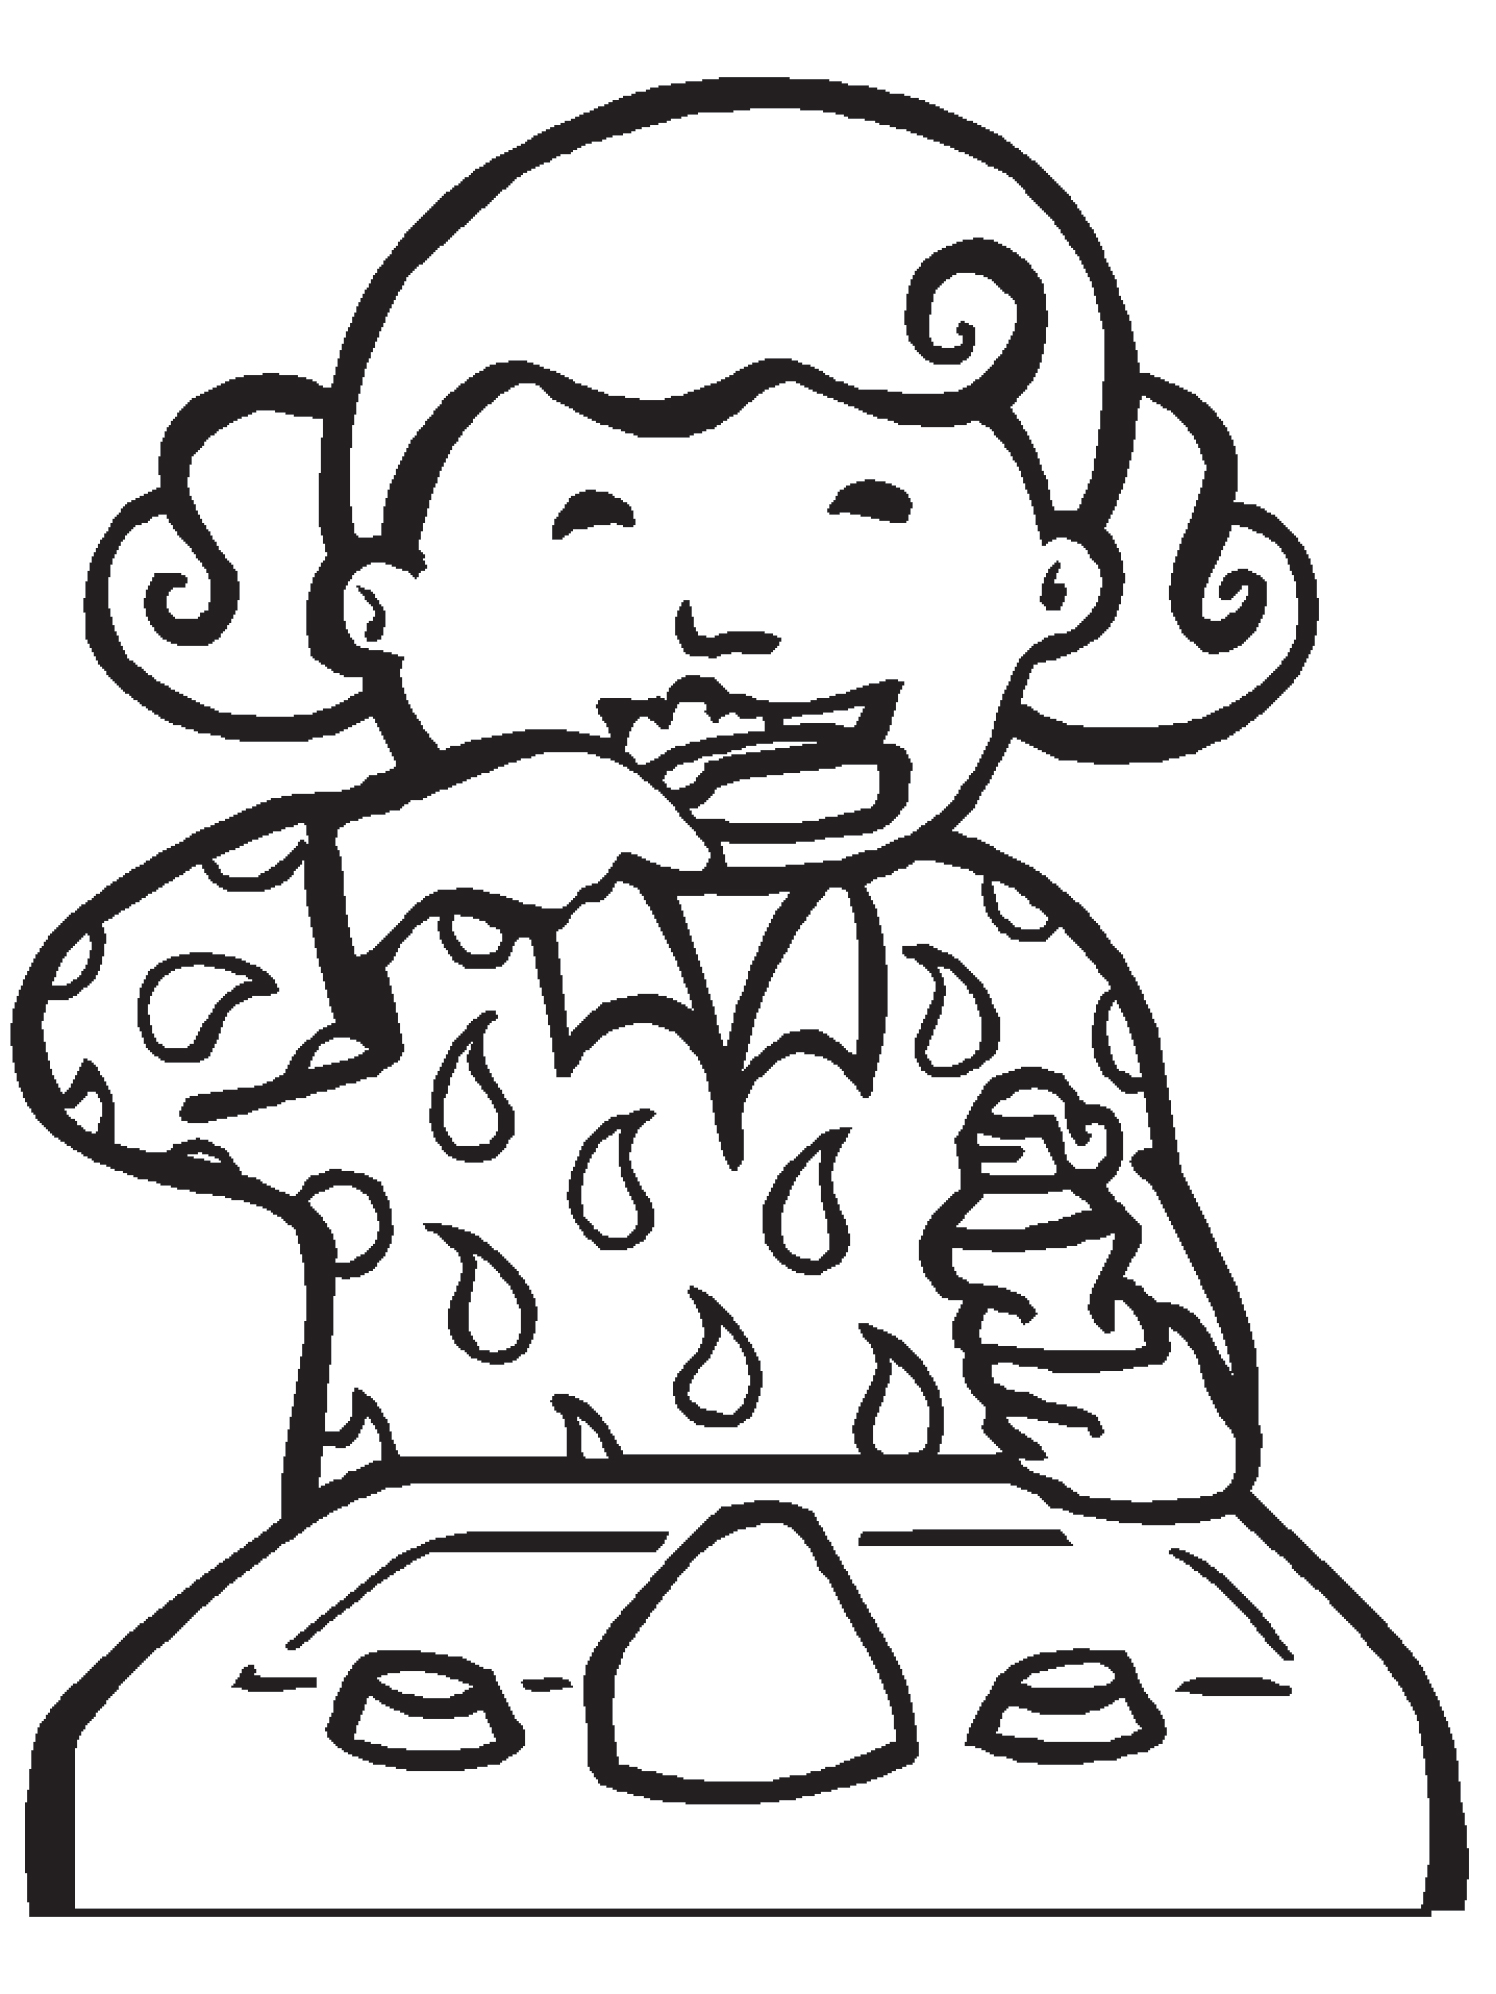 brush-your-teeth-coloring-pages-clip-art-library